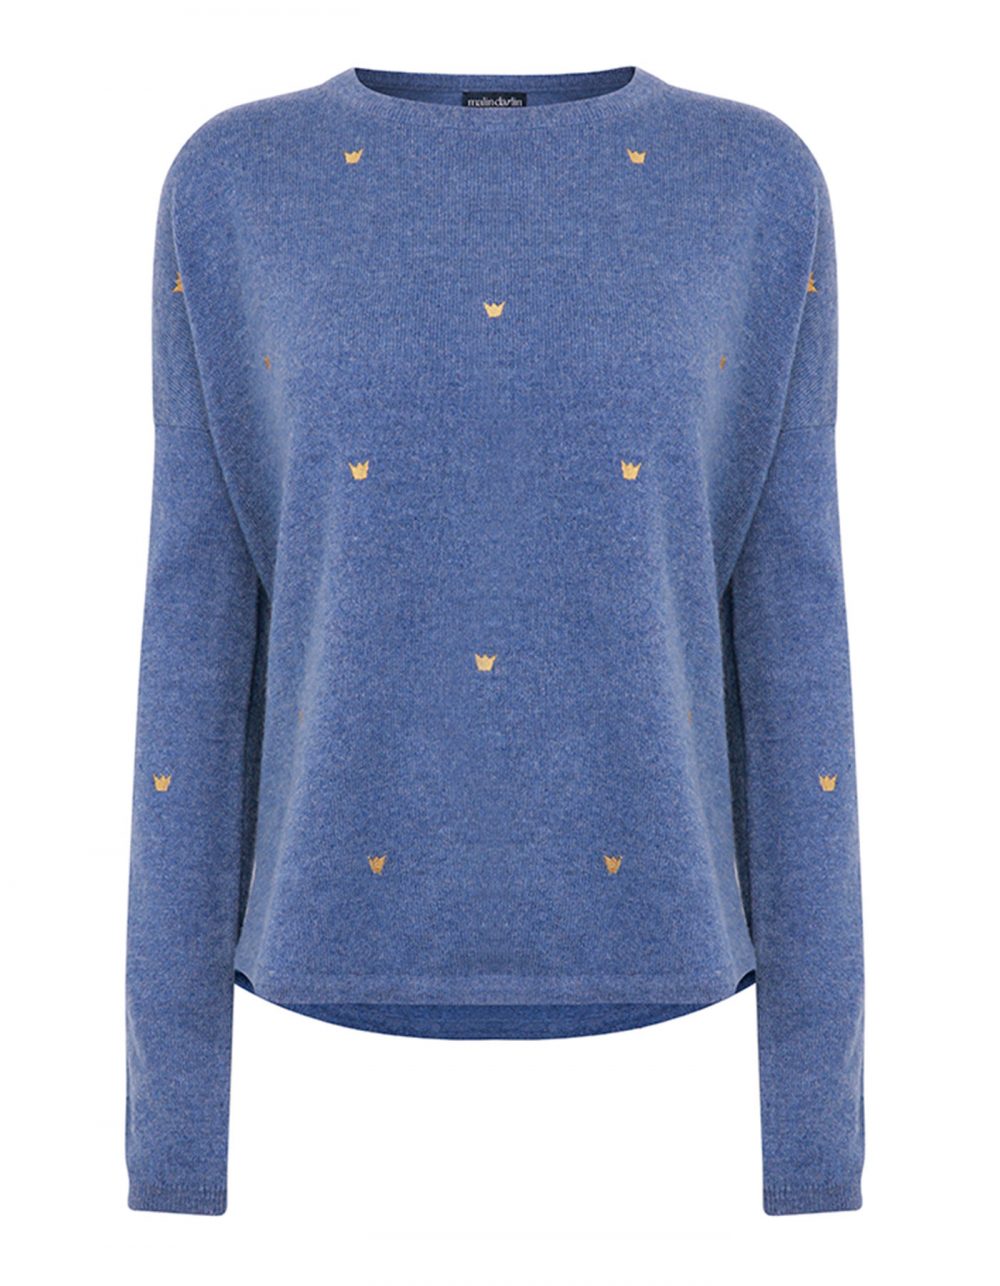 A photograph of the malin darlin Hundred Crowns blue cashmere jumper taken against a white background.